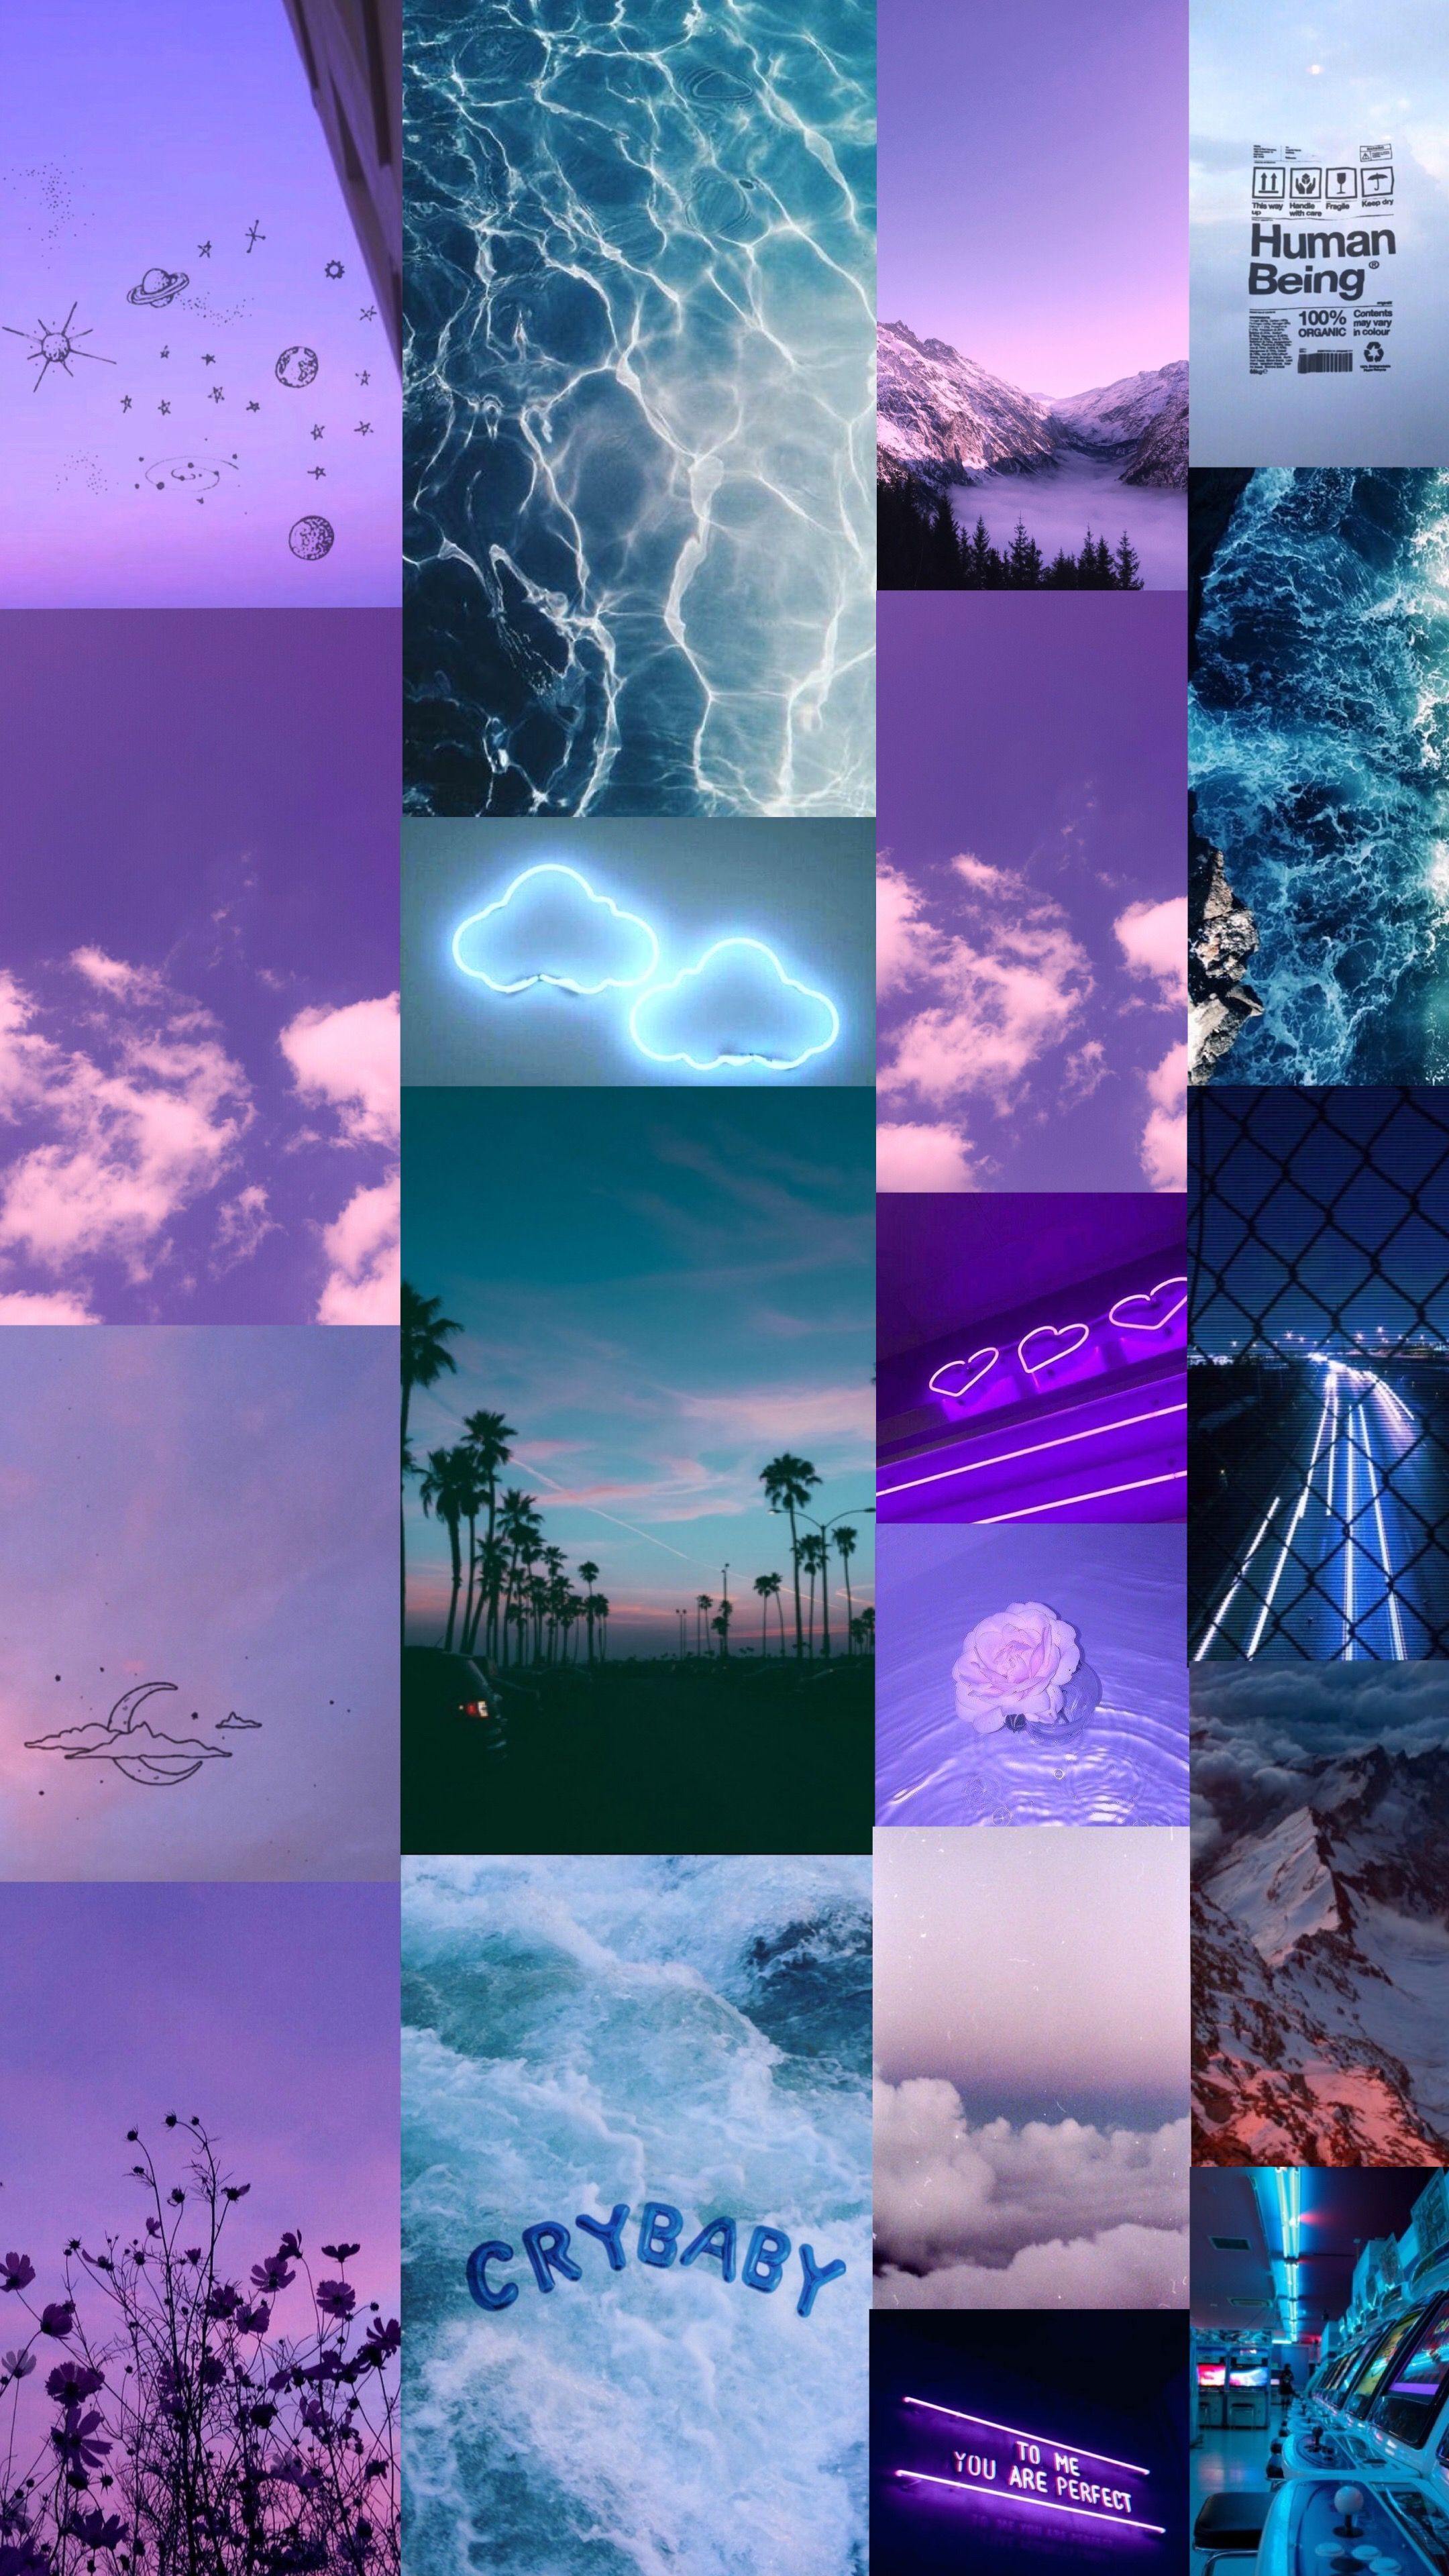 A collage of pictures with different colors - Light blue, blue, purple, cute purple